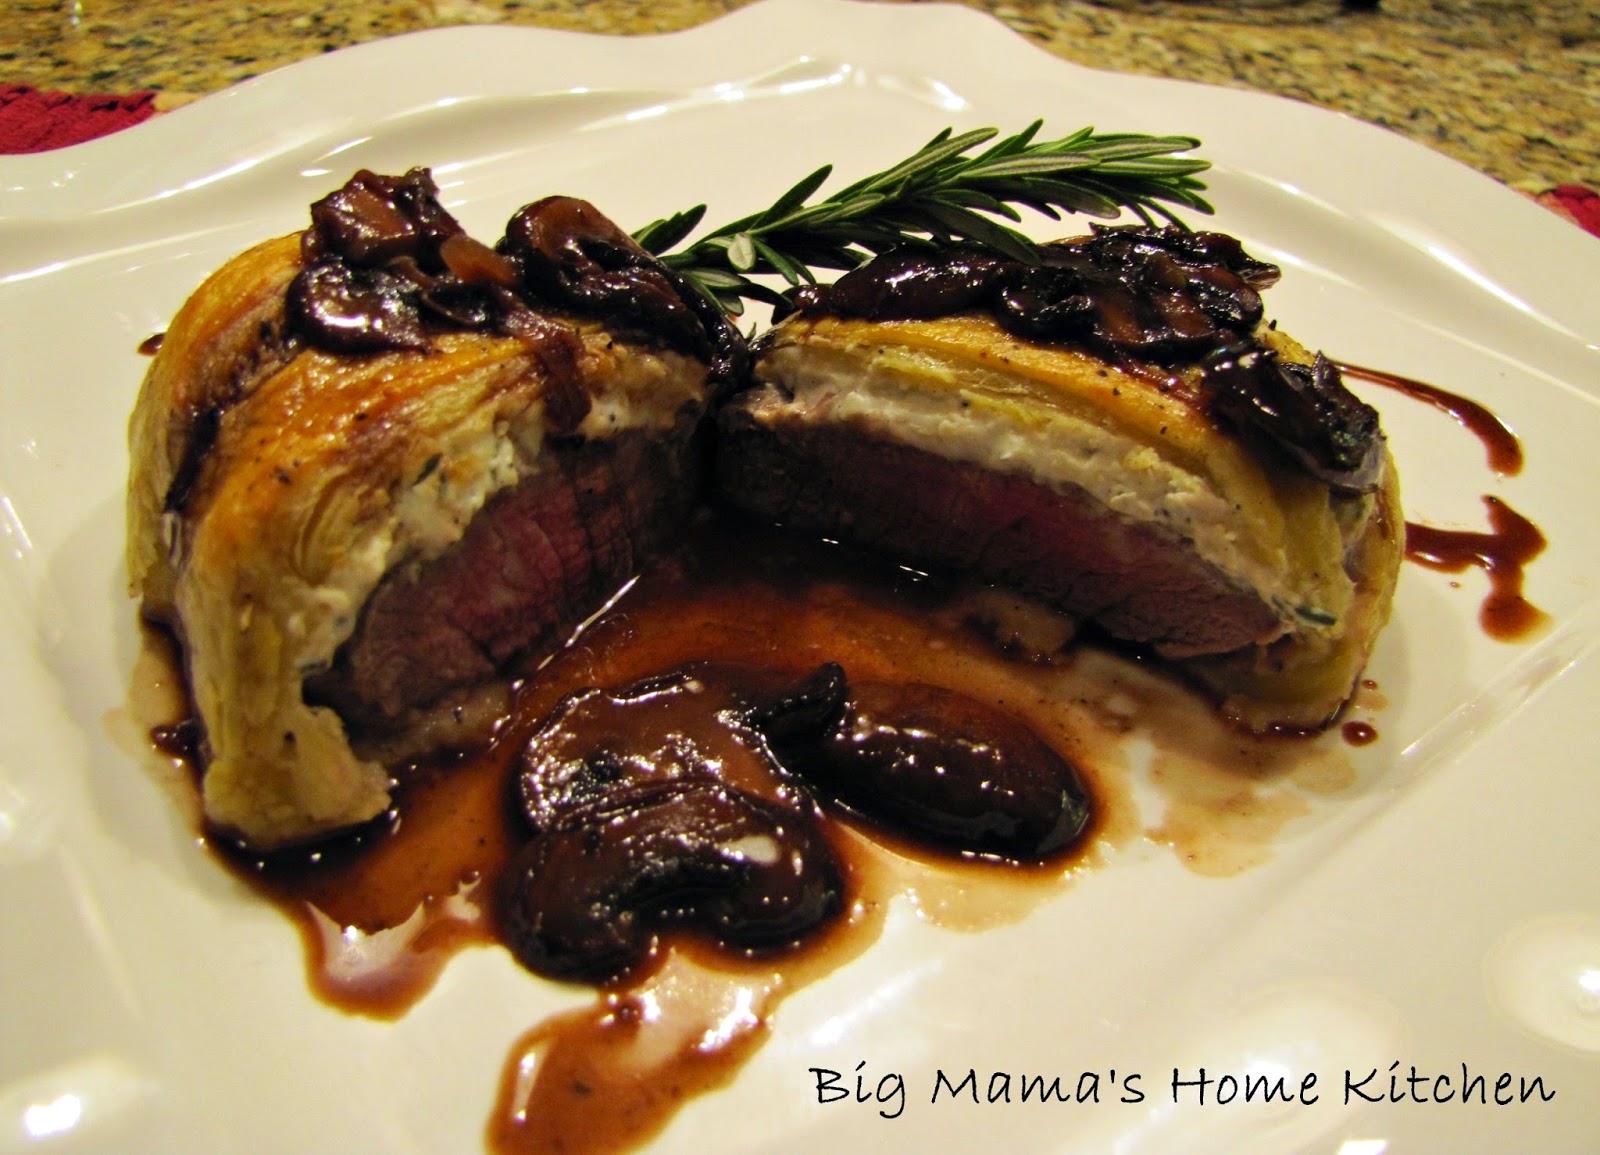 Big Mamas Home Kitchen: Deconstructed Individual Surprise Beef Wellingtons